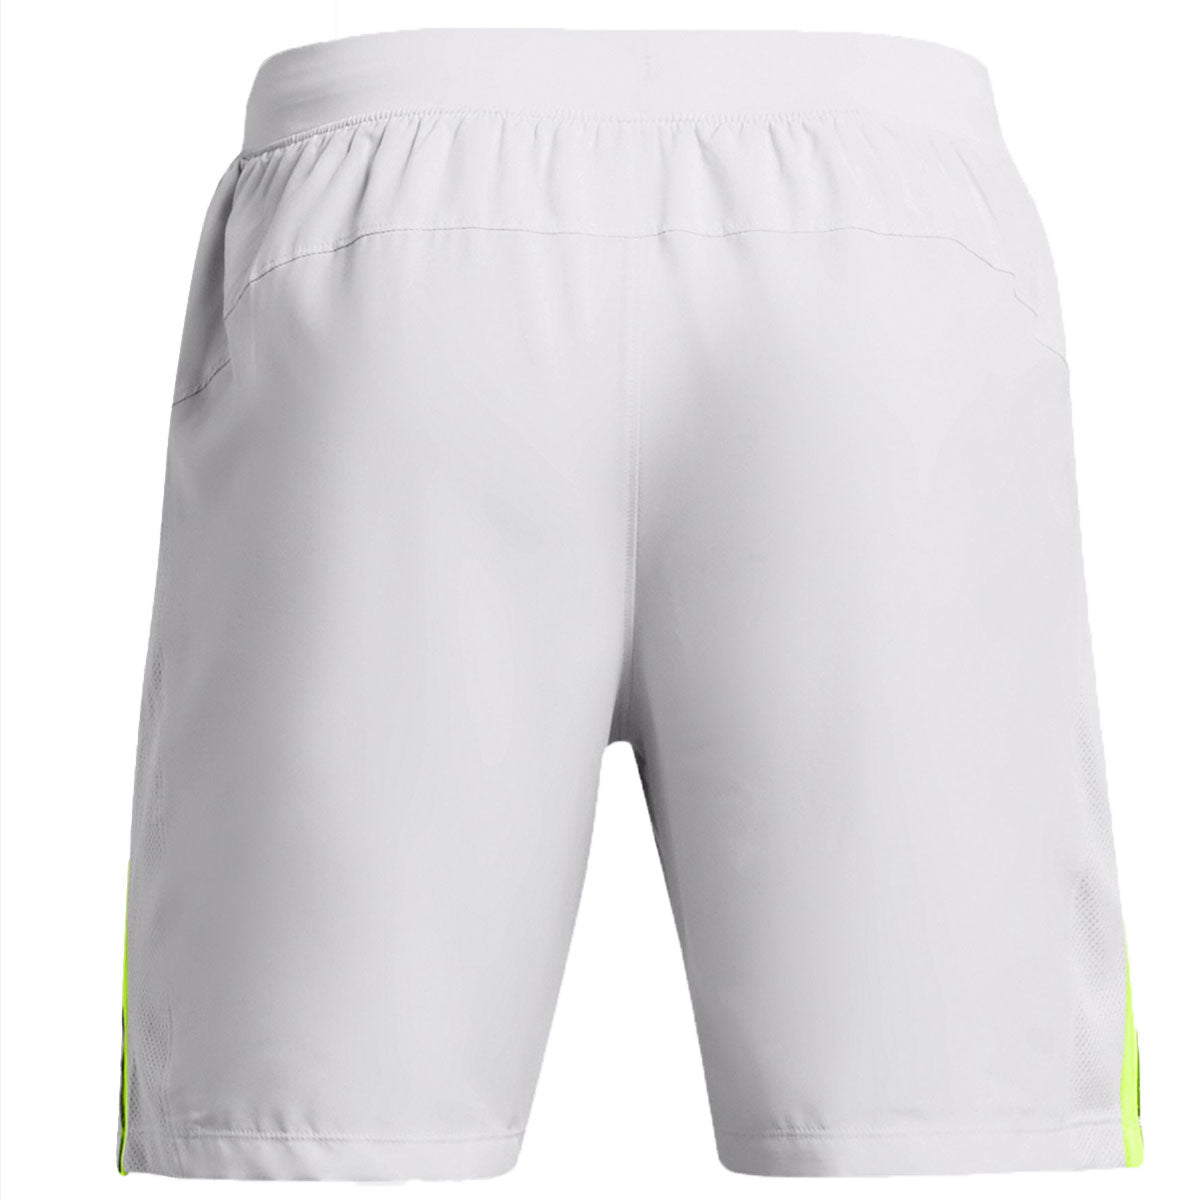 Under Armour Launch 7 inch Running Shorts - Mens - Halo Grey/High Vis Yellow/Reflective